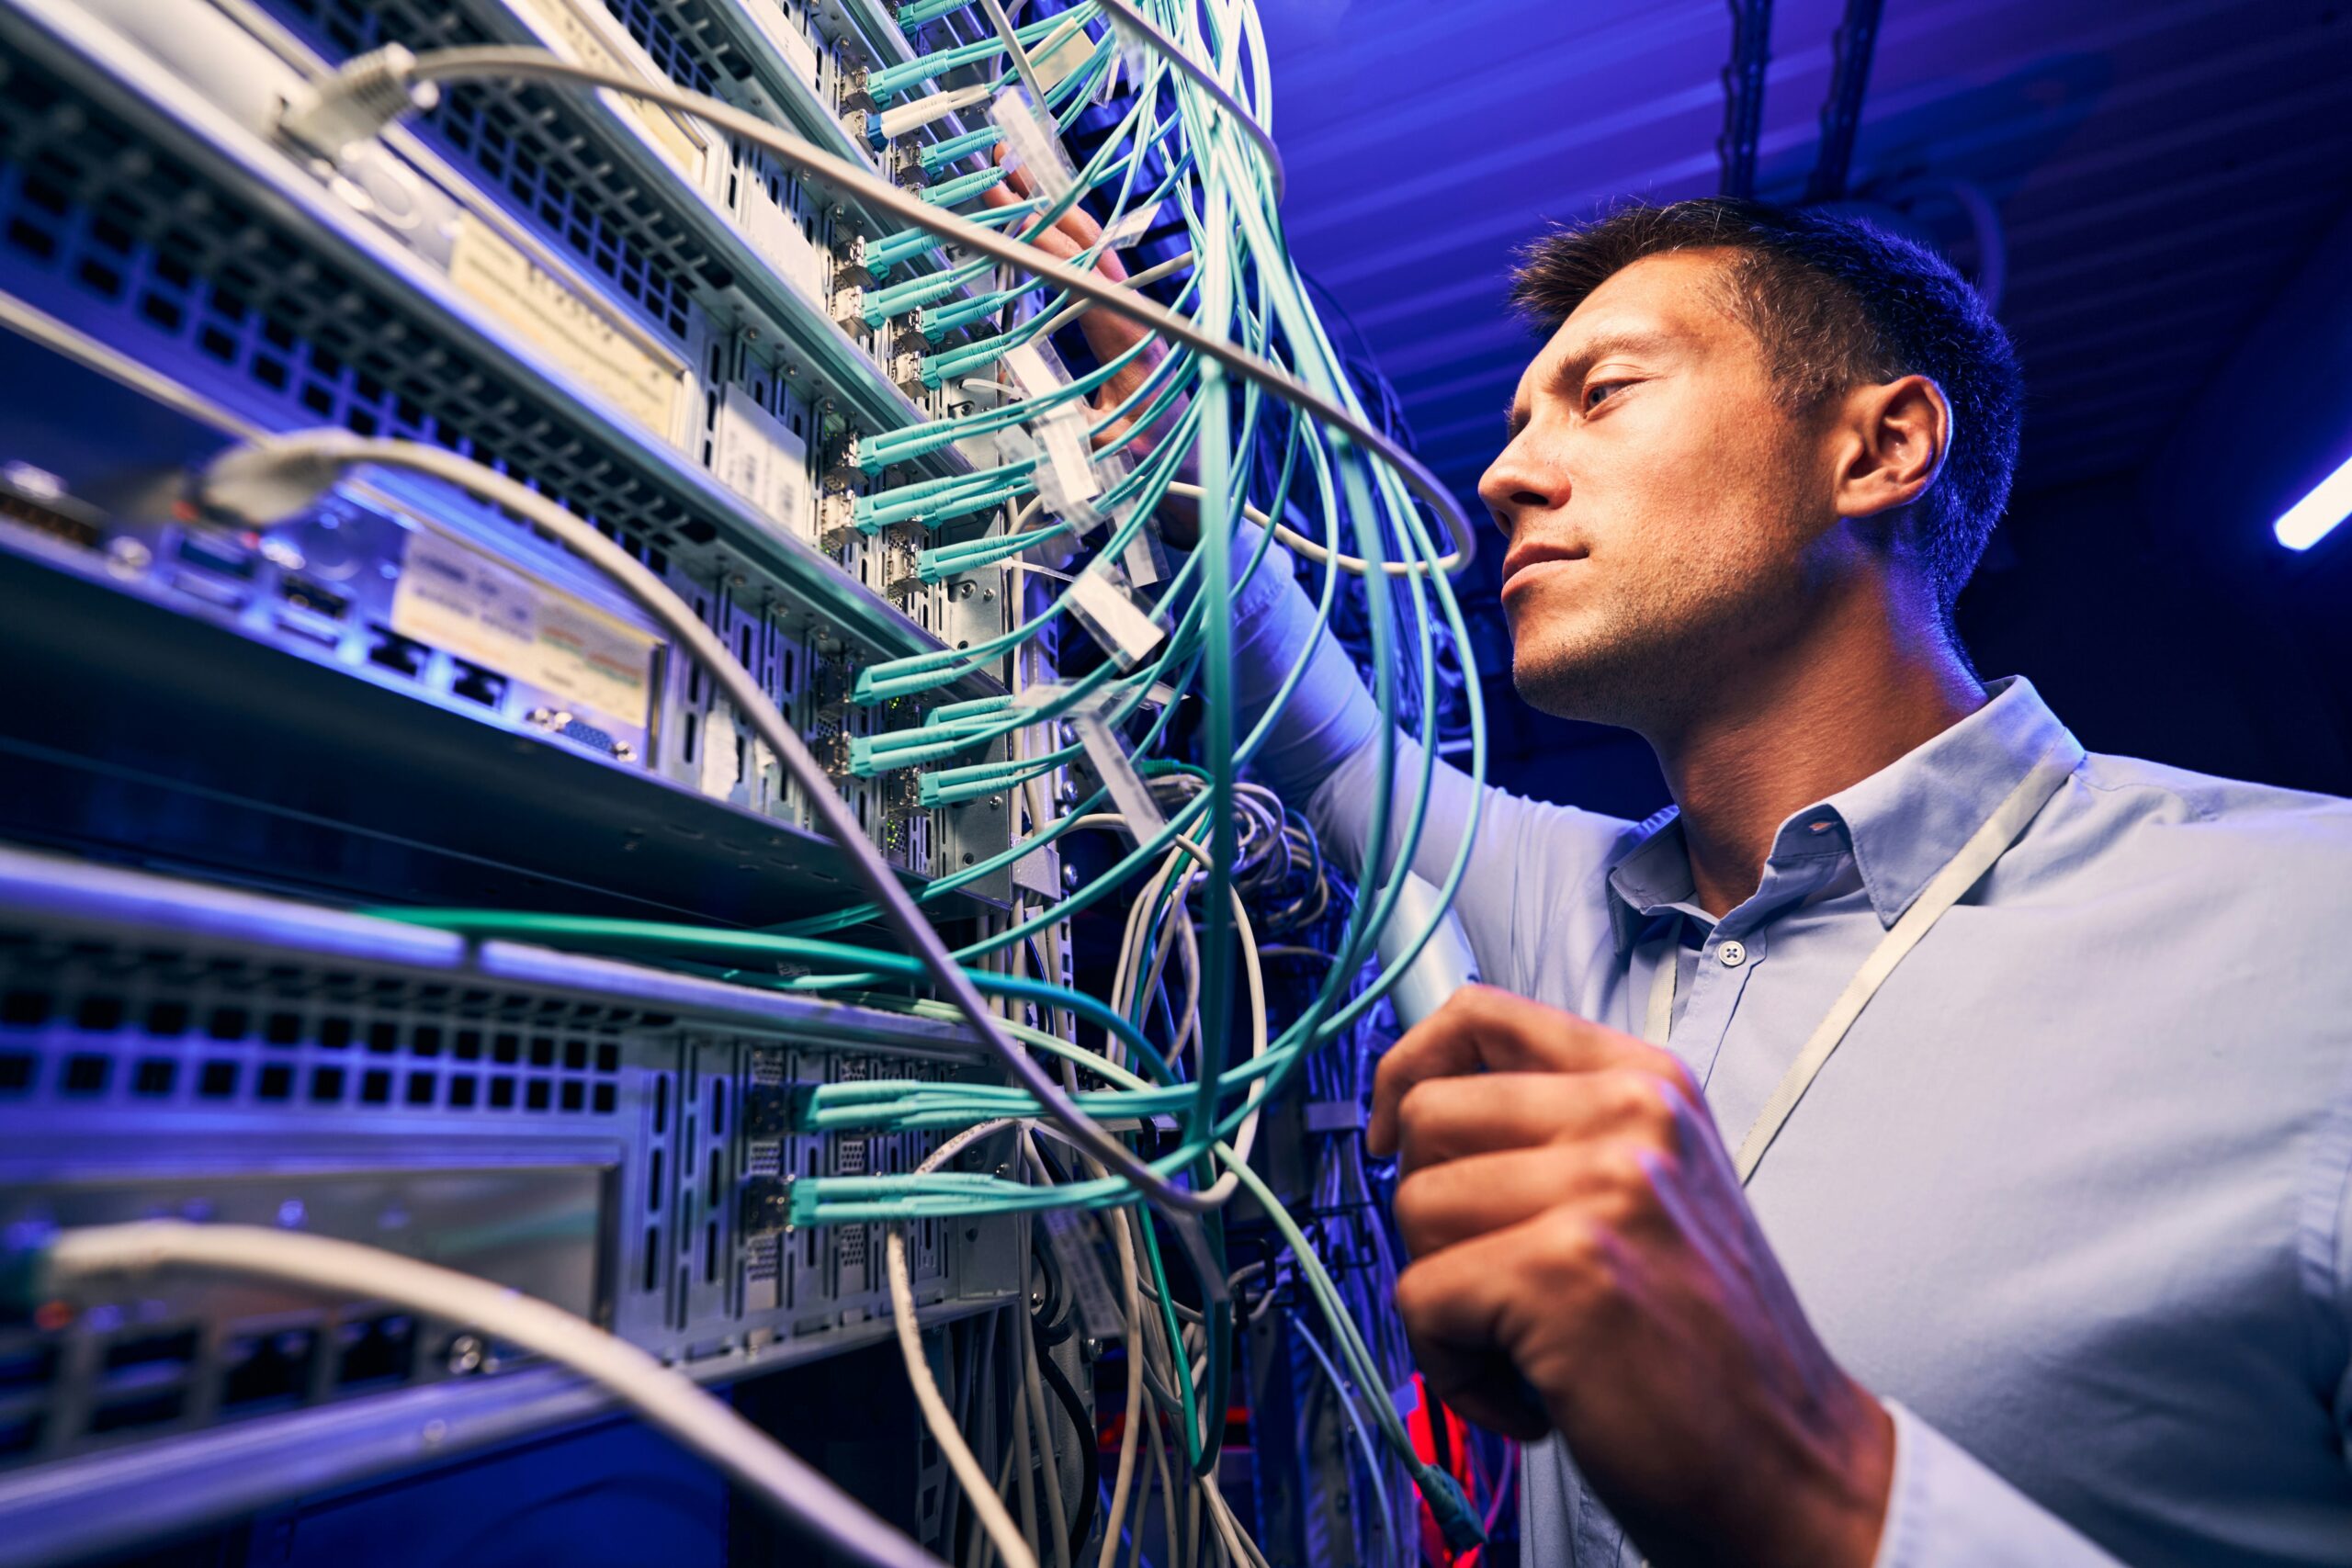 An IT consultant inspects network cables in a server room, focusing on connections in a rack of equipment illuminated by blue light.